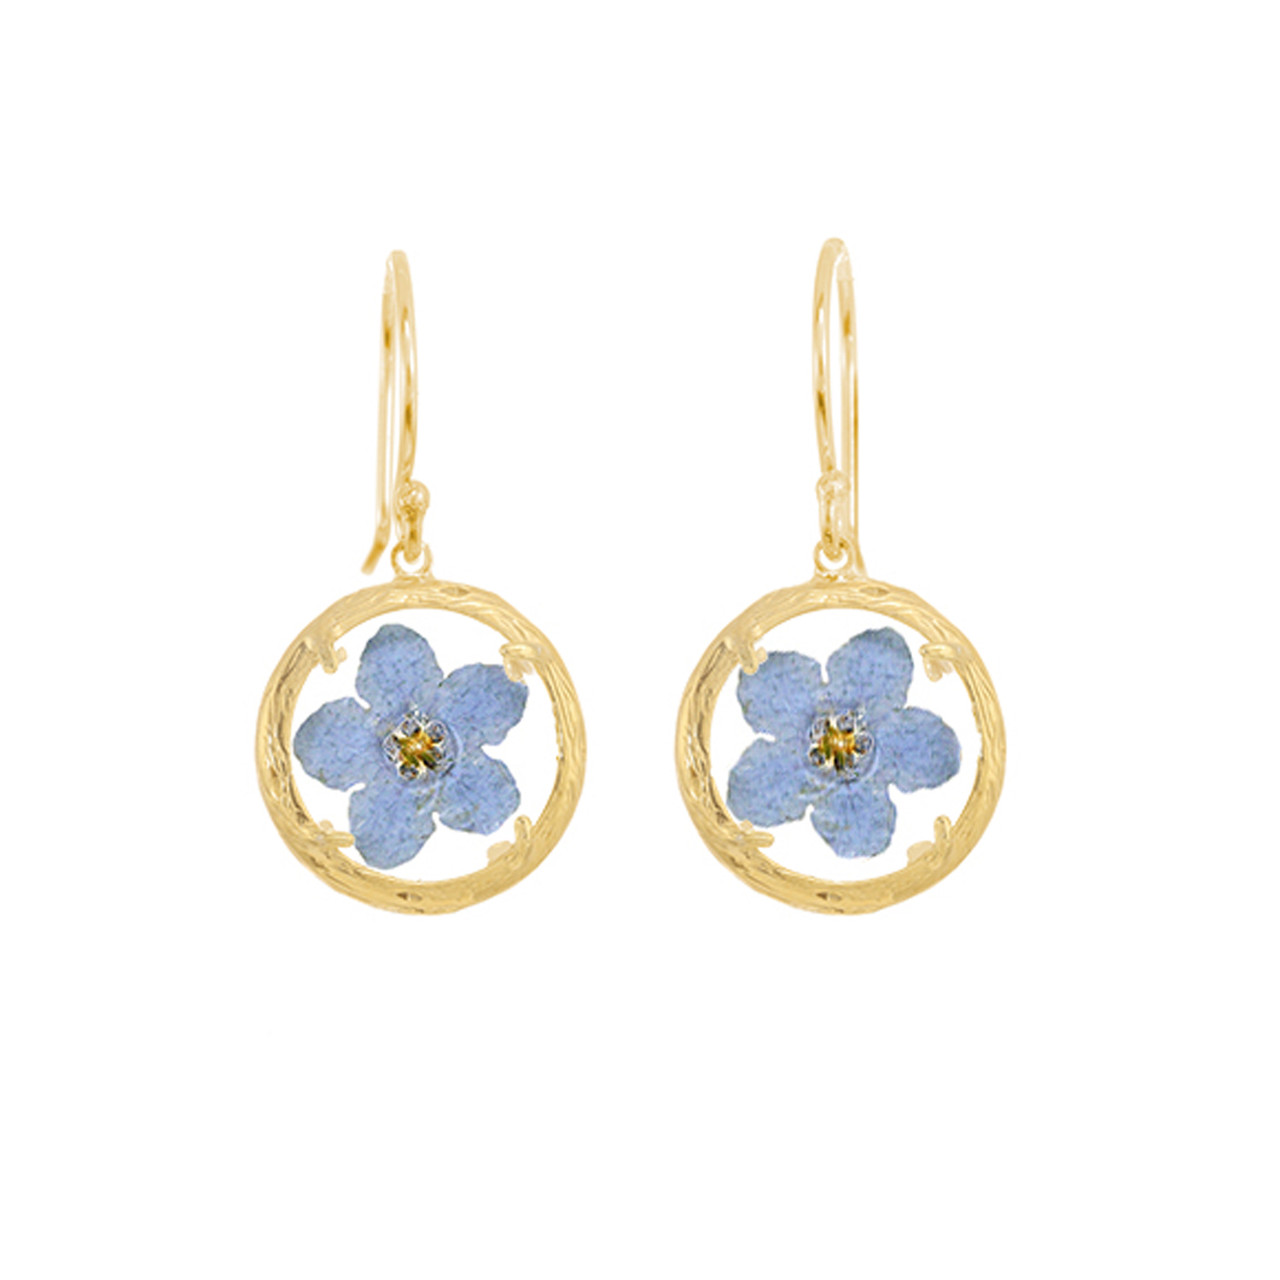 Gold Plated Mini Glass Botanical Drop Earrings Forget-Me-Not, Catherine Weitzman, tomfoolery